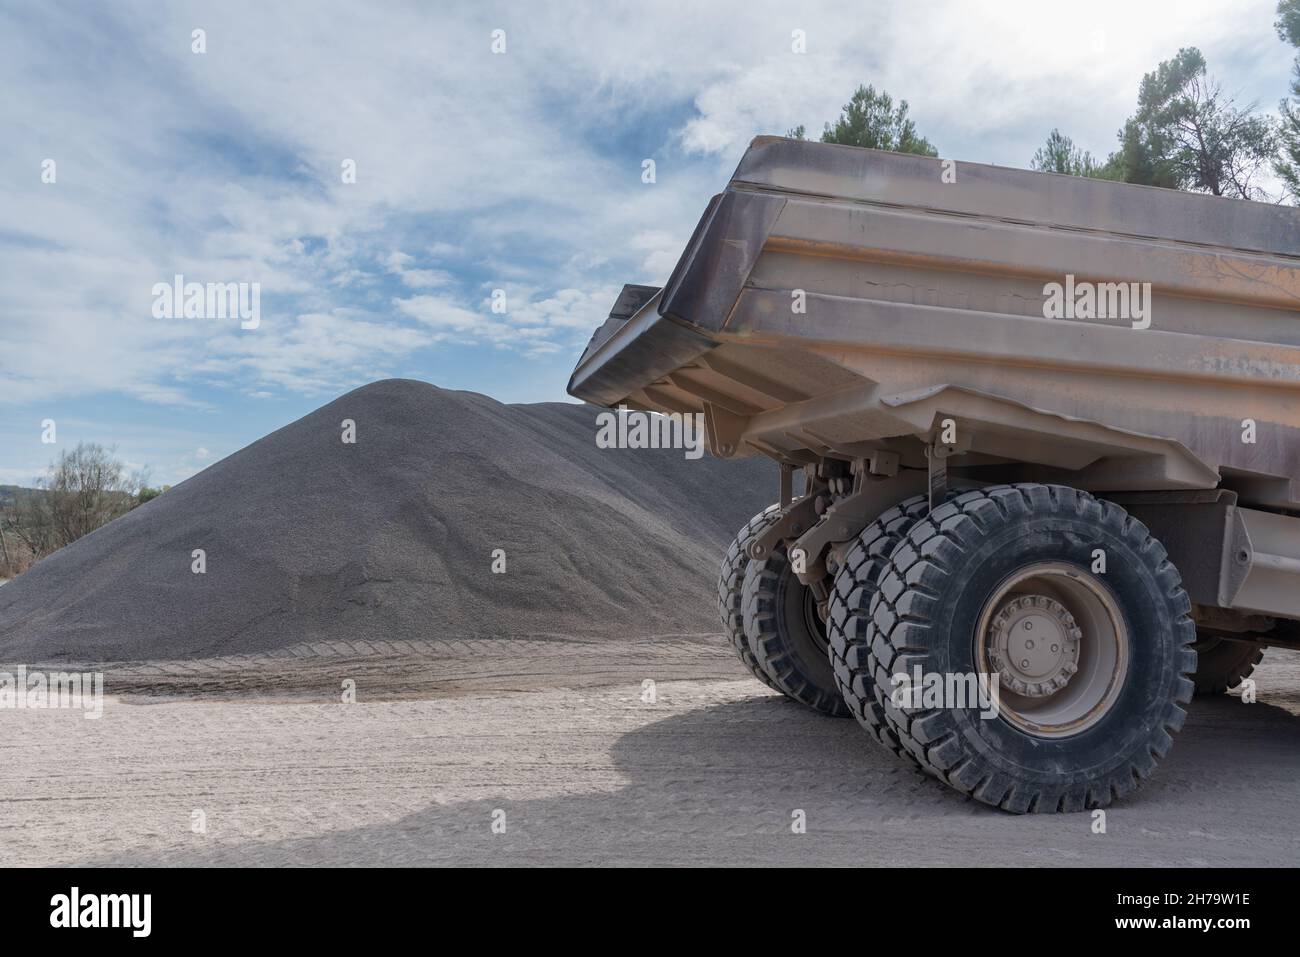 Large dump truck used for moving sand and gravel in quarries. Stock Photo